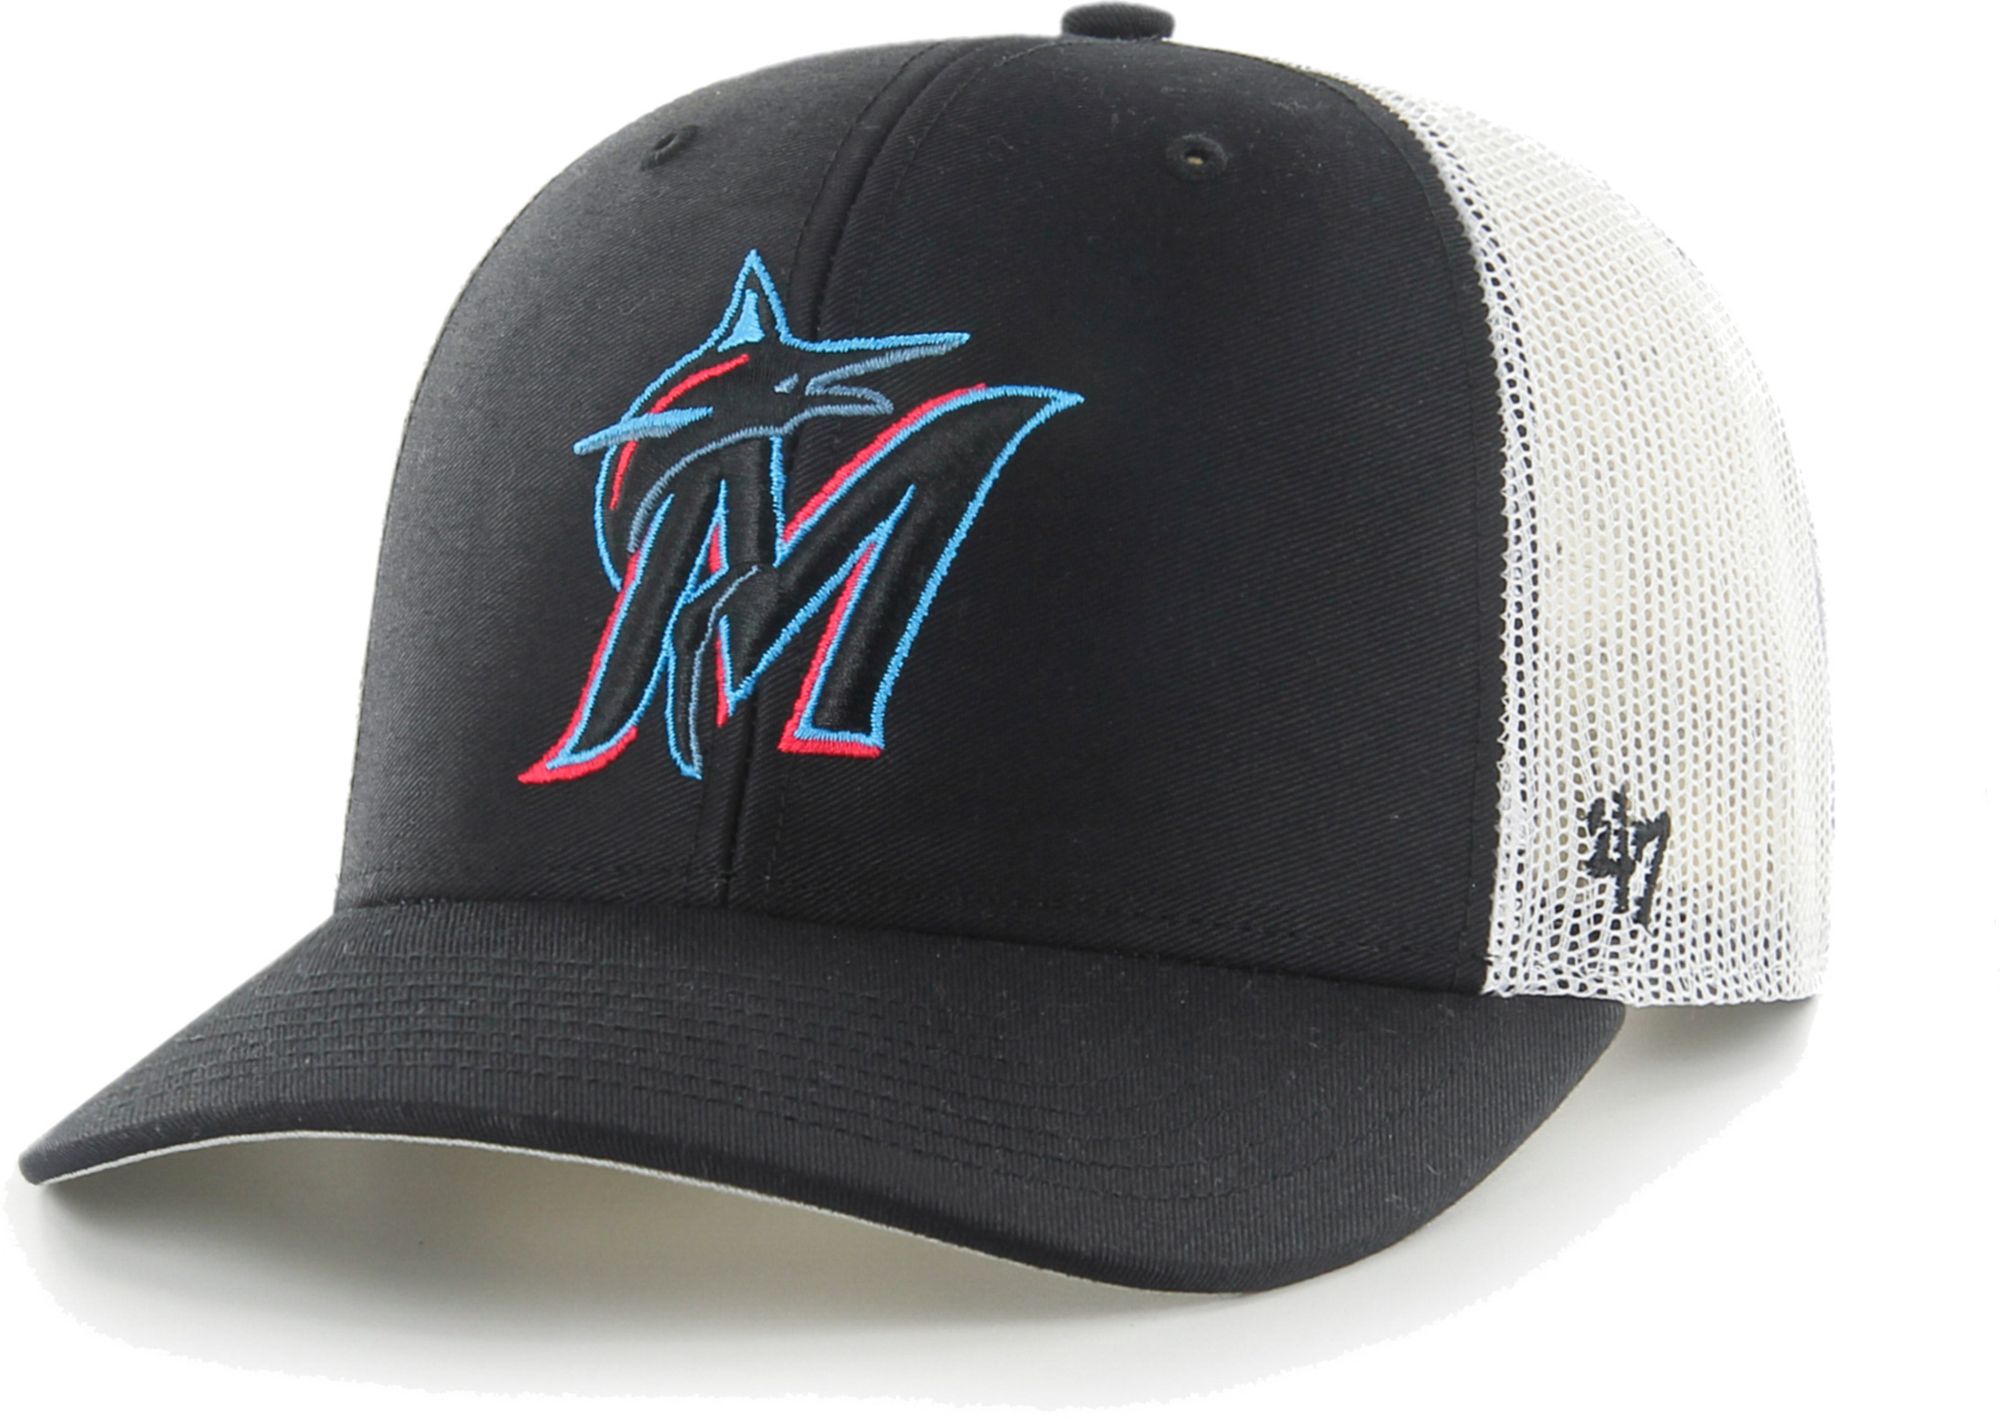 MIAMI MARLINS CITY CONNECT '47 CLEAN UP